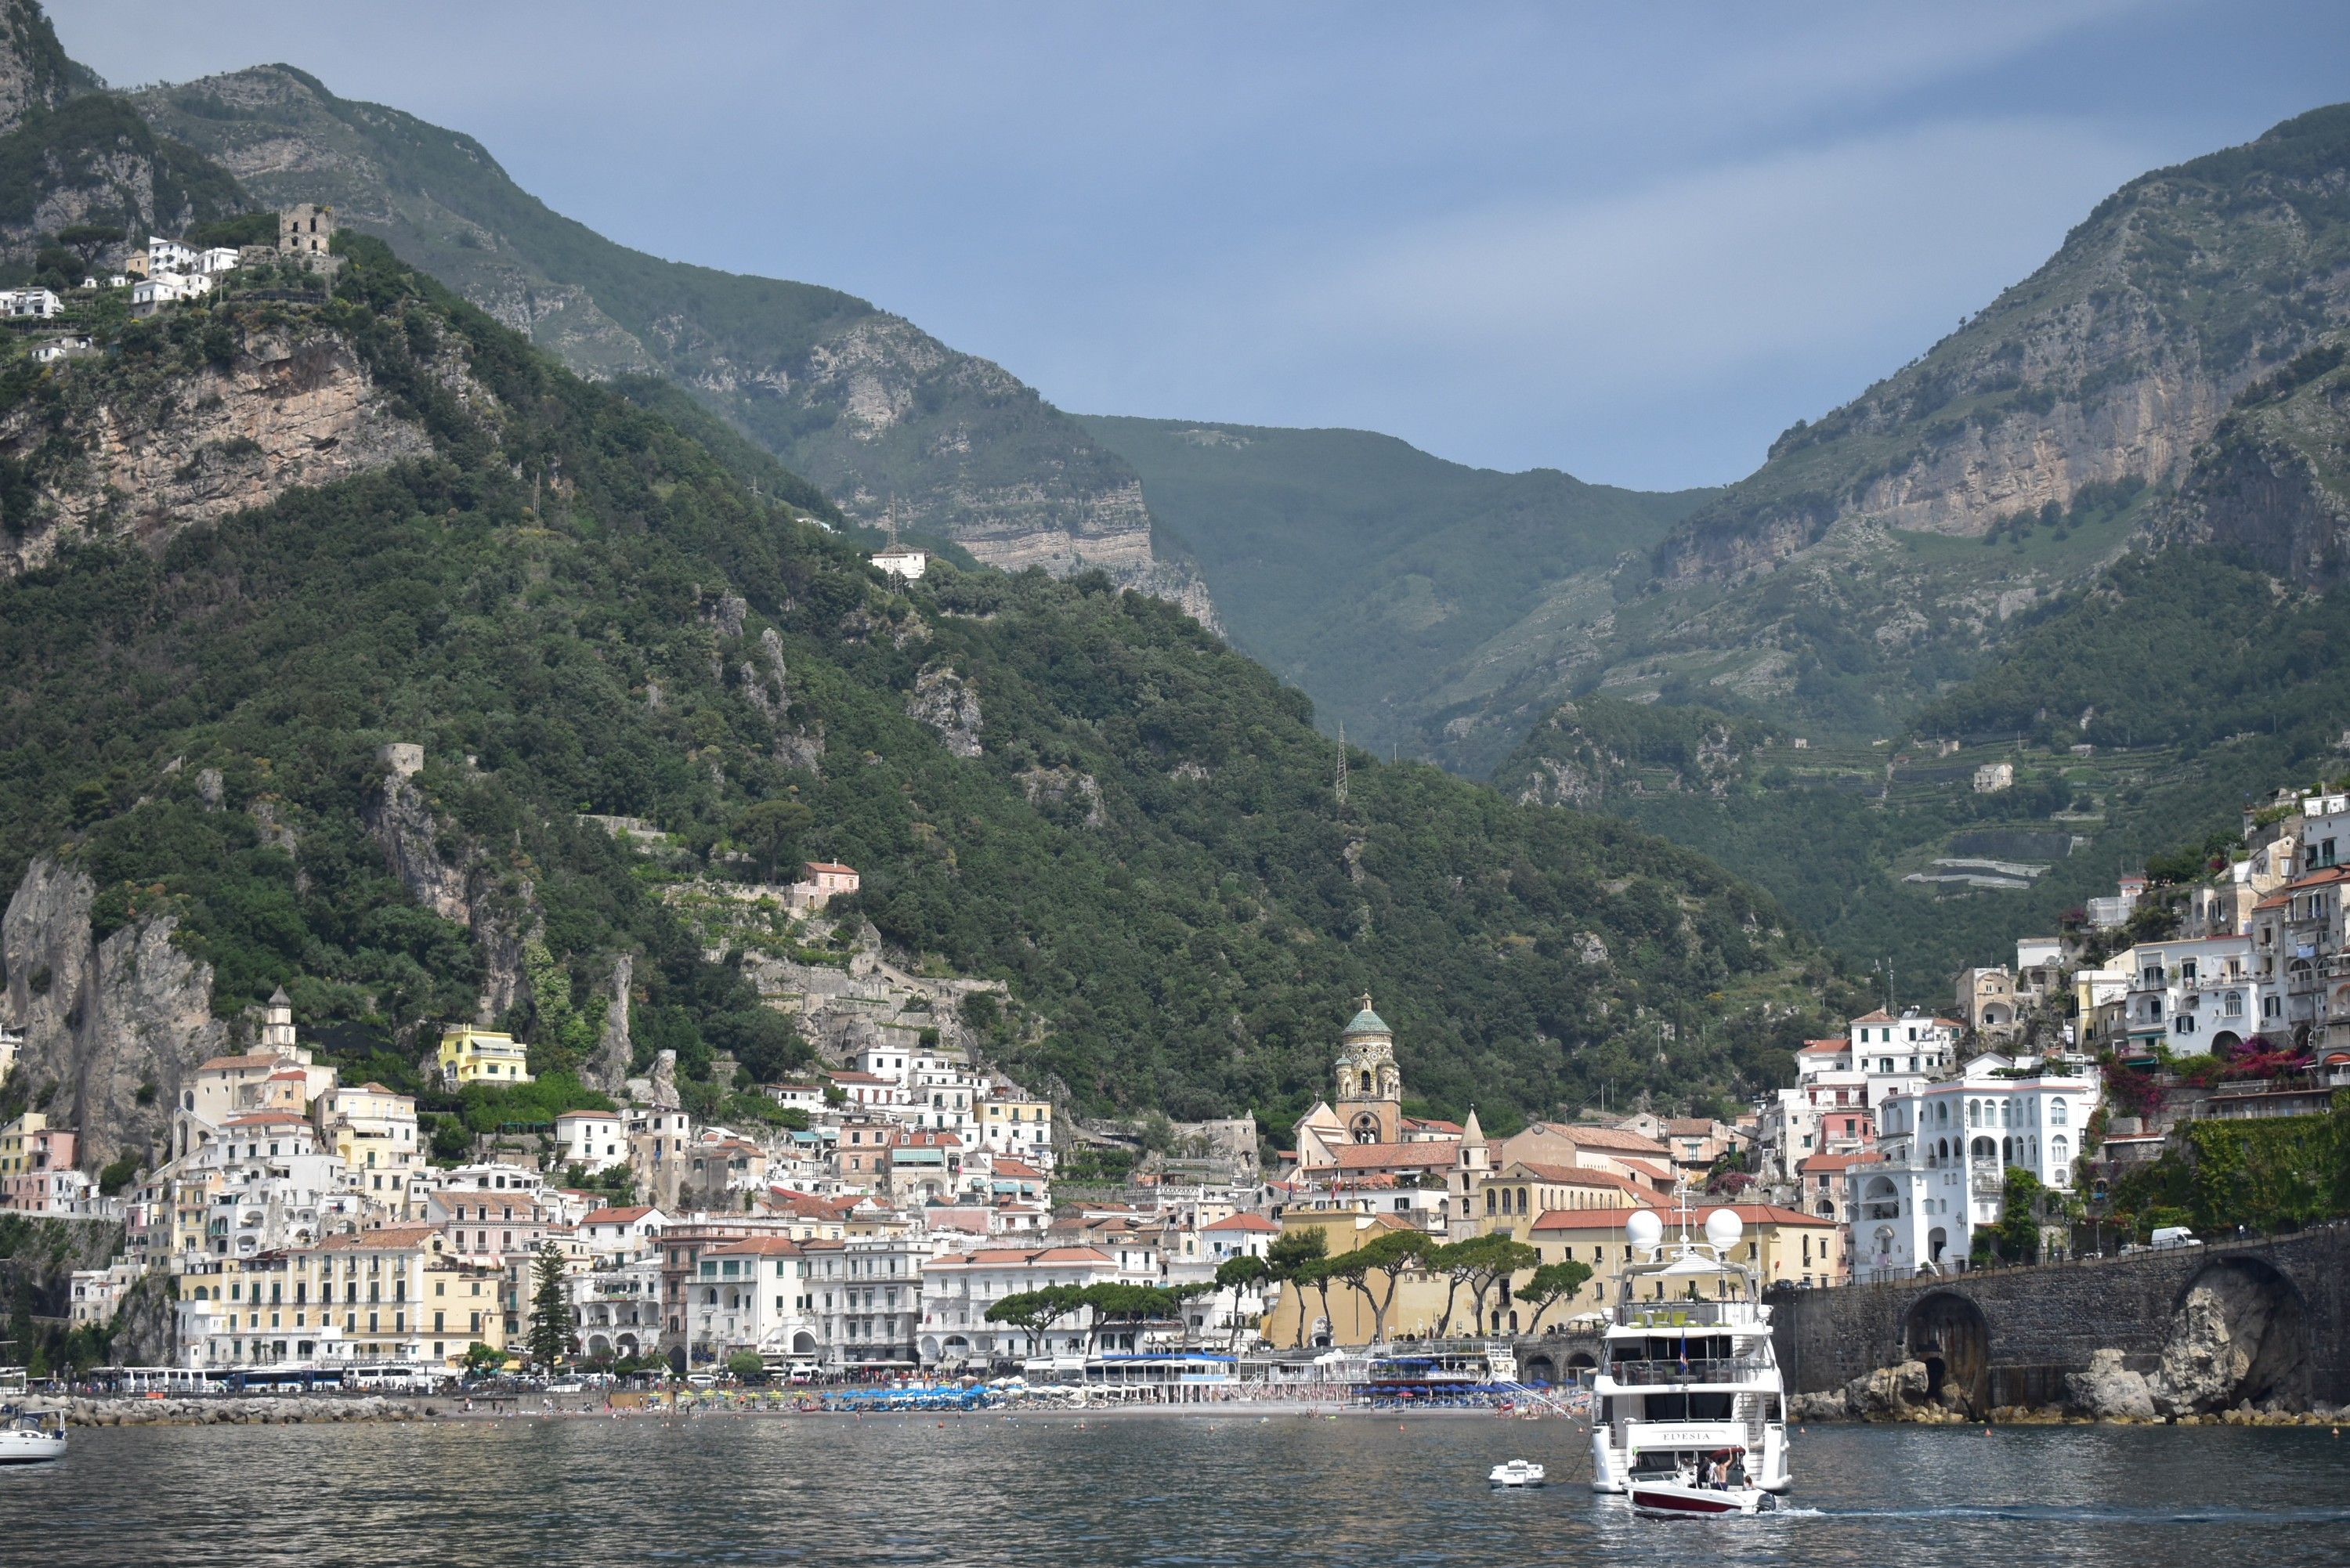 Caption: A photo from a boat of Amalfi, nestled between the mountains, with a yacht floating on the water in its bay. (Local Guide @MoniDi)